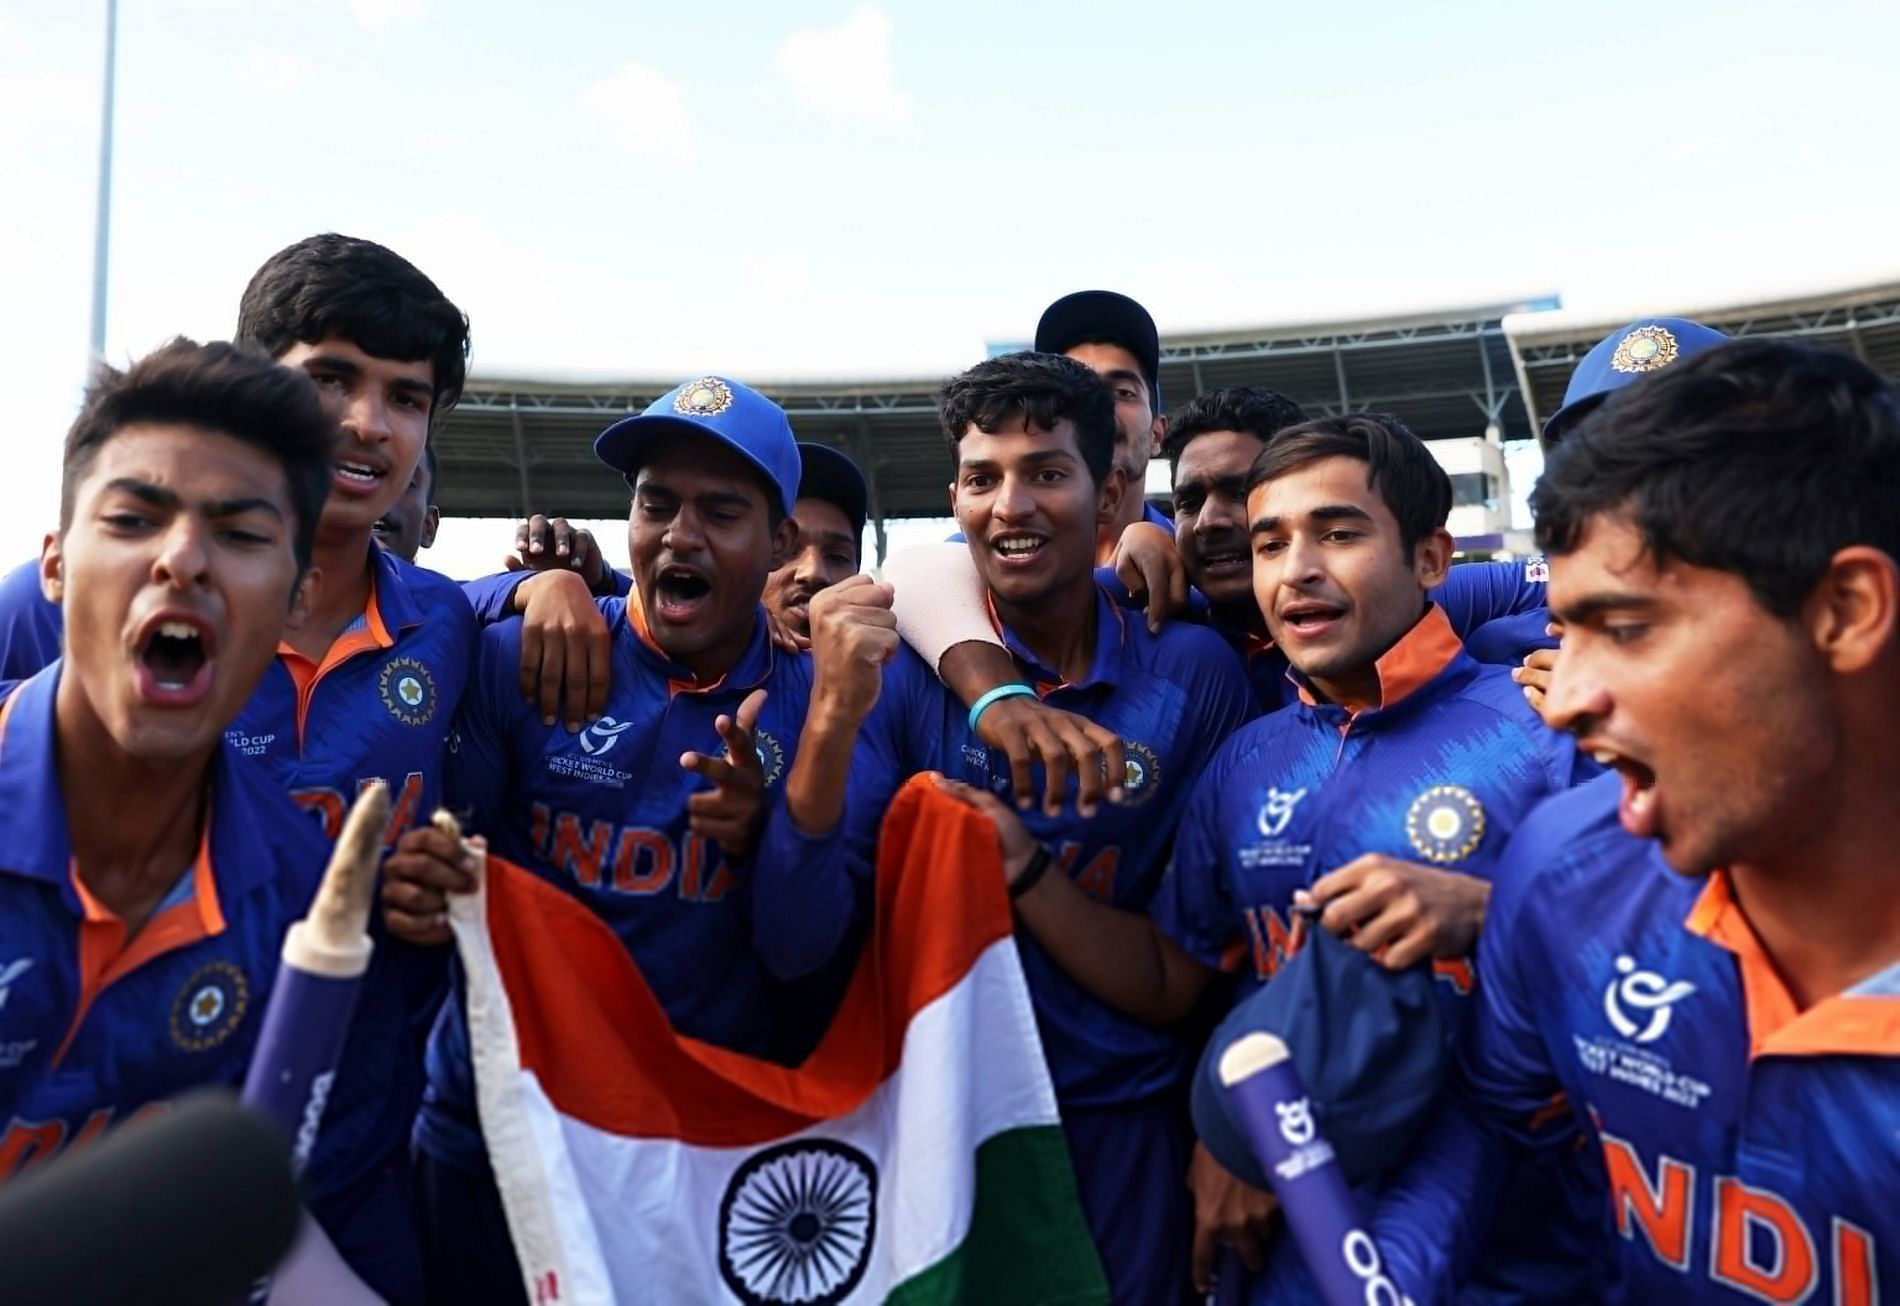 The Boys in Blue won the U-19 Cricket World Cup for a fifth time